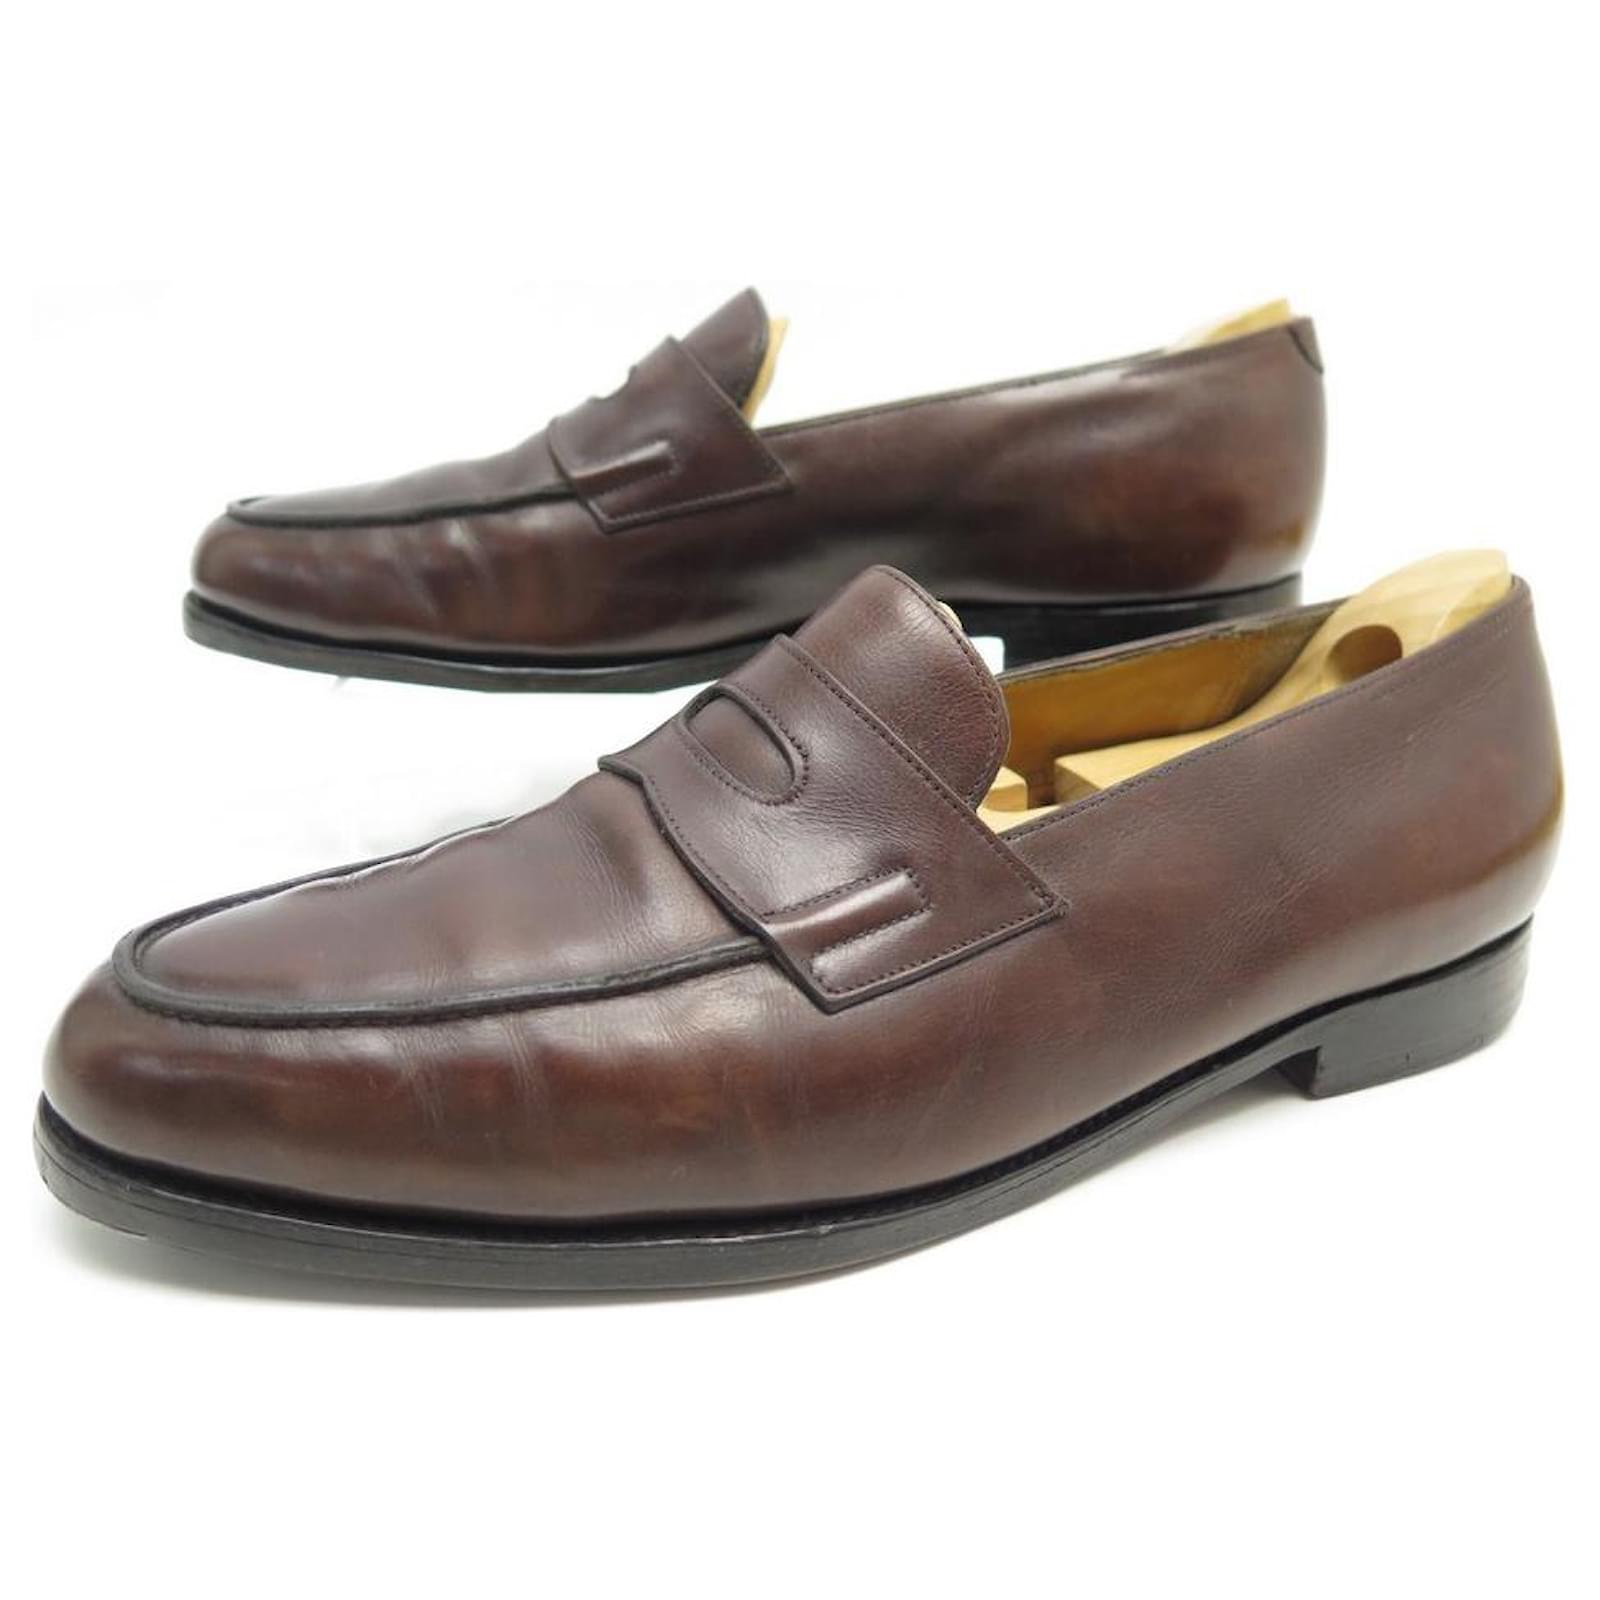 JOHN LOBB LOPEZ LOAFERS 9E 43 BROWN LEATHER + SLEEVES SHOES ref